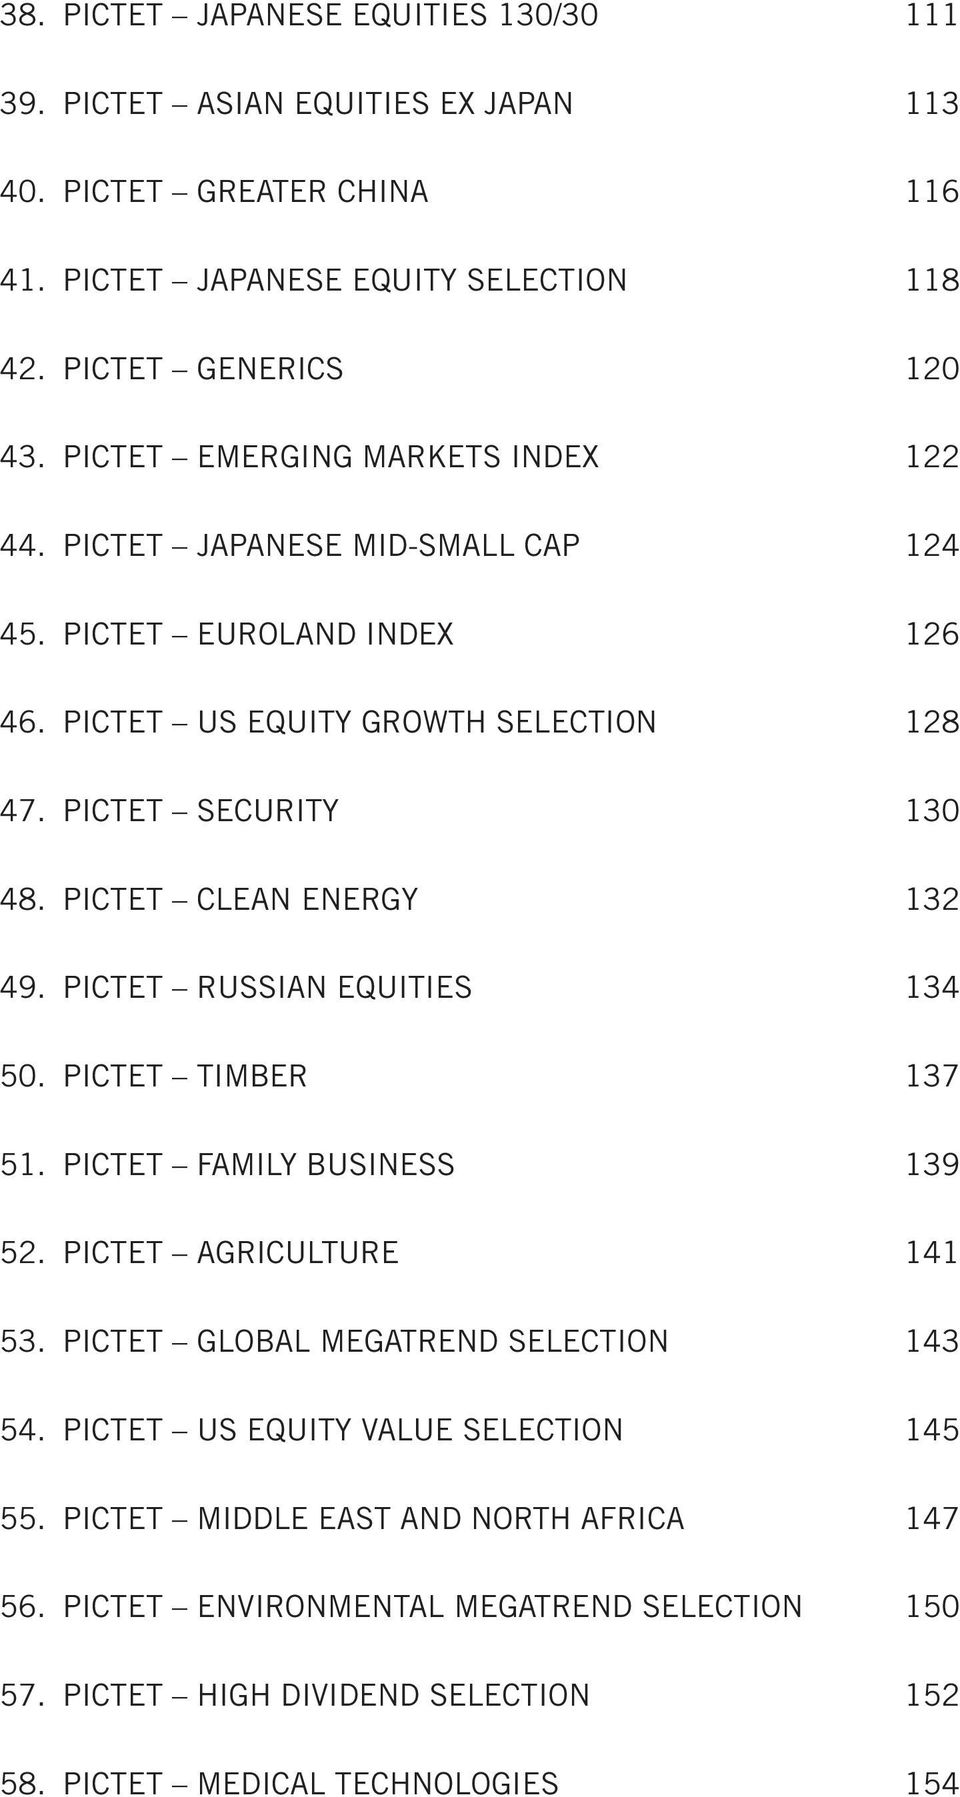 PICTET CLEAN ENERGY 132 49. PICTET RUSSIAN EQUITIES 134 50. PICTET TIMBER 137 51. PICTET FAMILY BUSINESS 139 52. PICTET AGRICULTURE 141 53. PICTET GLOBAL MEGATREND SELECTION 143 54.